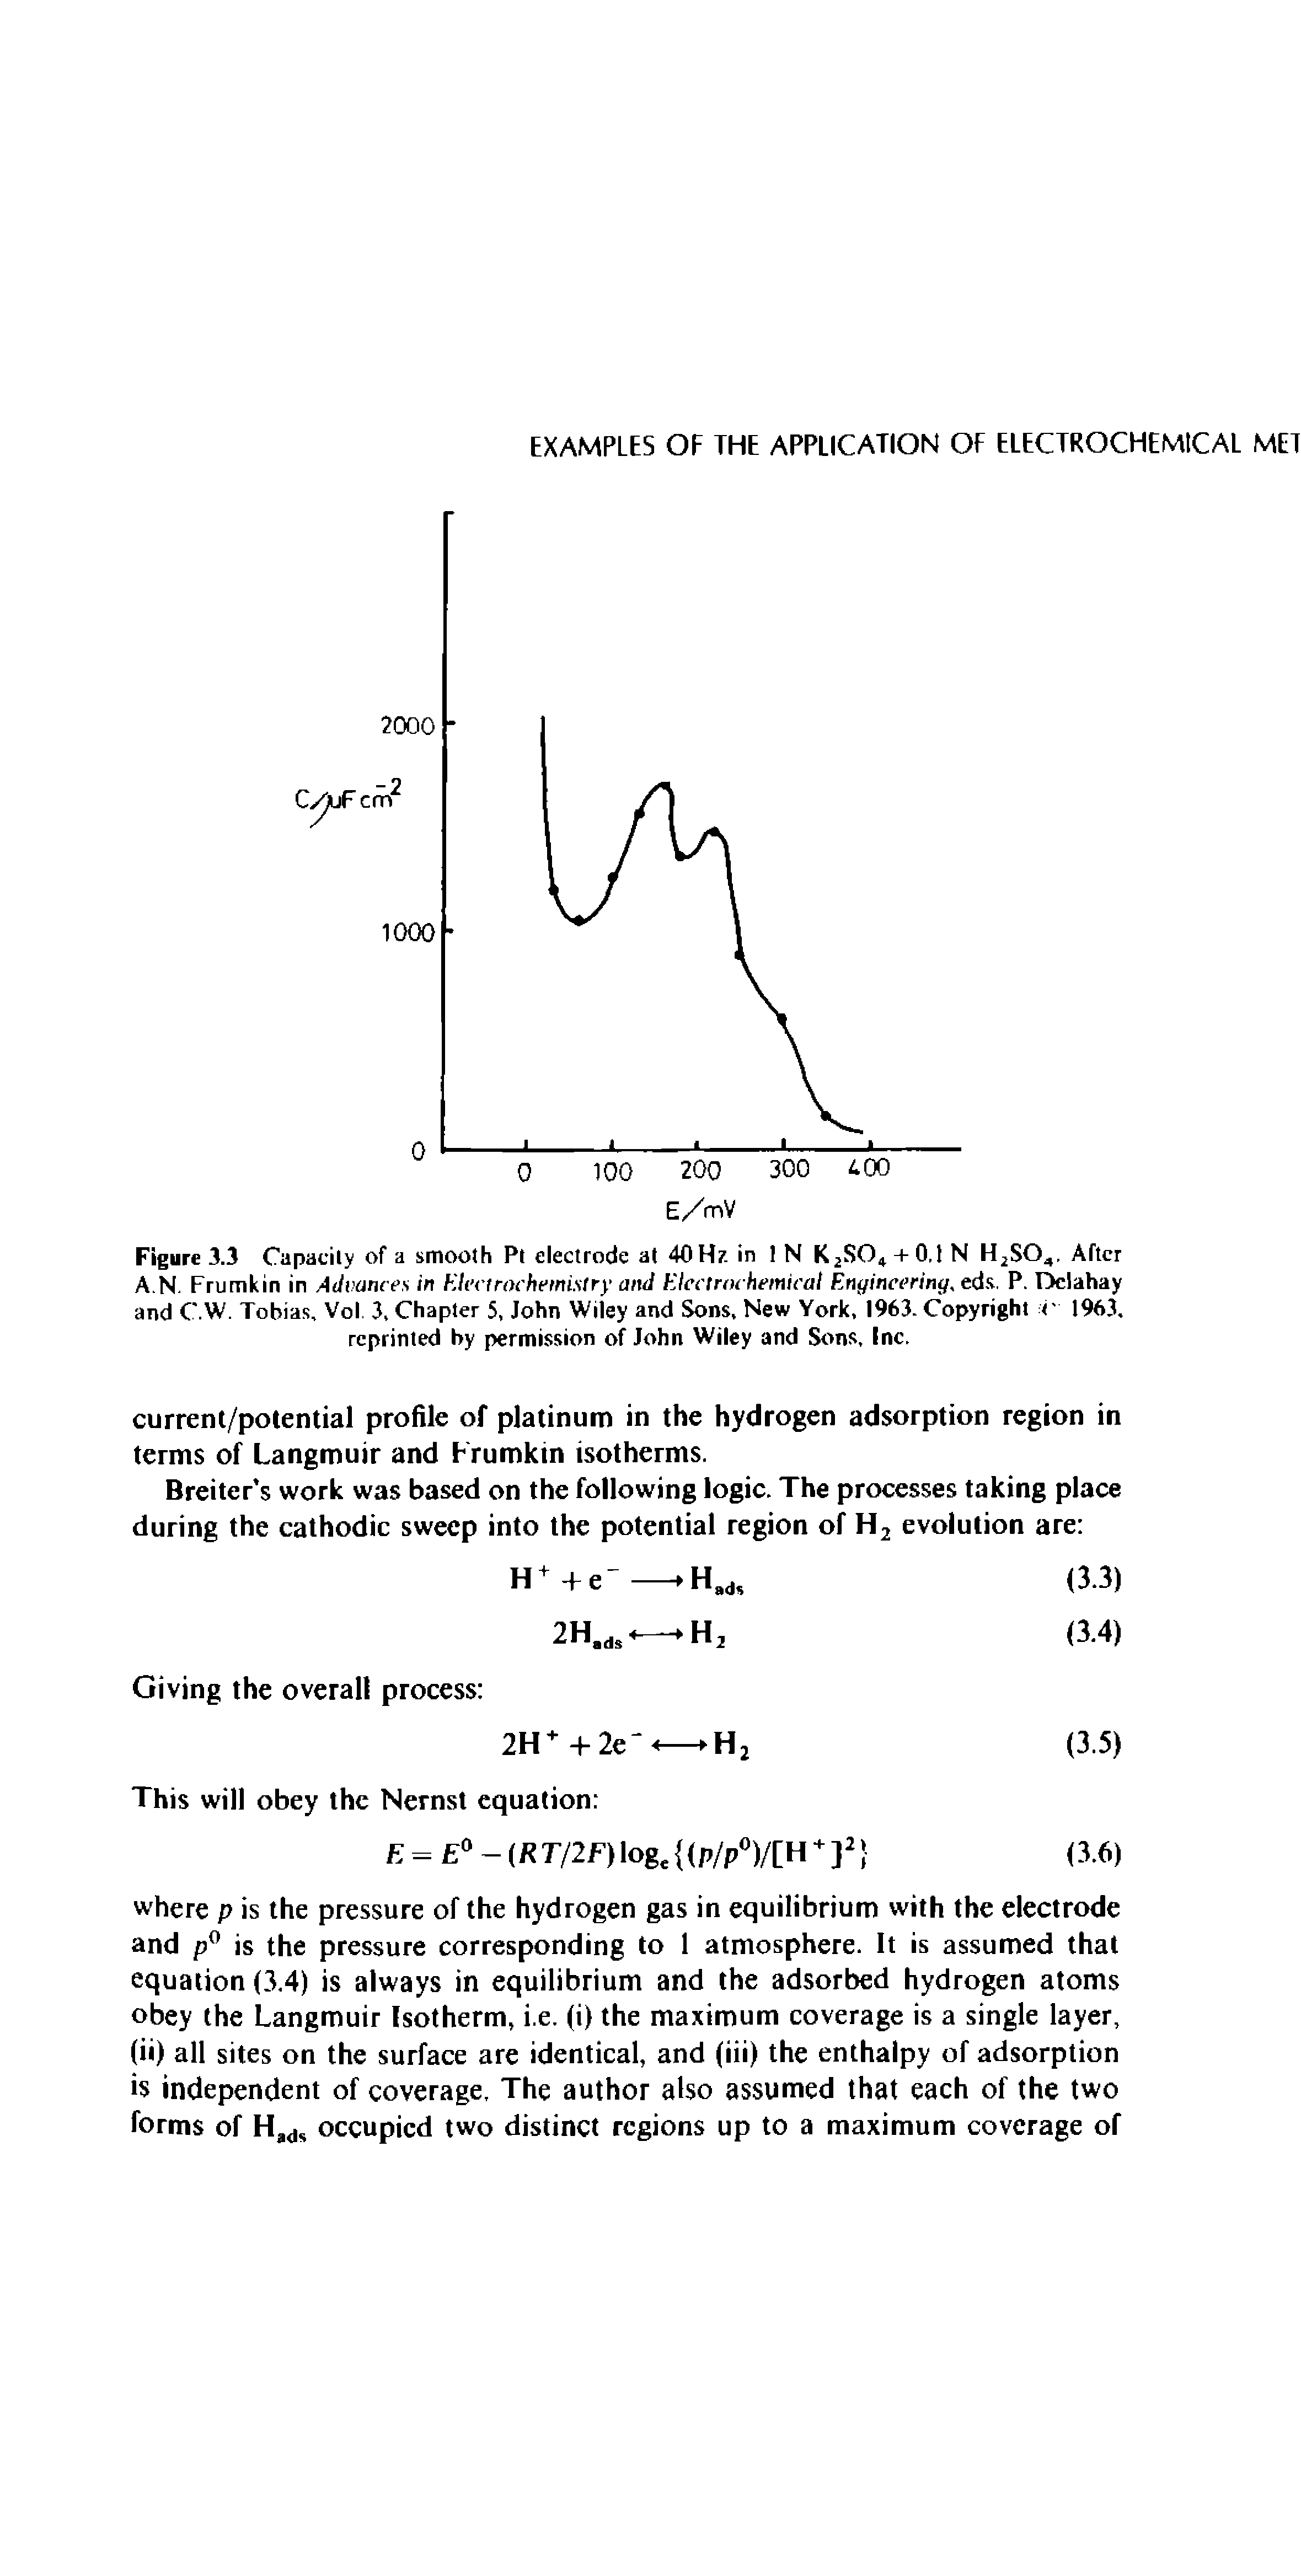 Figure 3.3 Capacity of a smooth Pt electrode at 40Hz in 1 N K2SO4 + 0,l N H2S04, After A N. Frumkin in Advances in Electrochemistry and Electrochemical Engineering, eds. P. Dclahay and C.W. Tobias, Vol 3, Chapter 5, John Wiley and Sons, New York, 1963. Copyright T 1963. reprinted by permission of John Wiley and Sons, Inc.